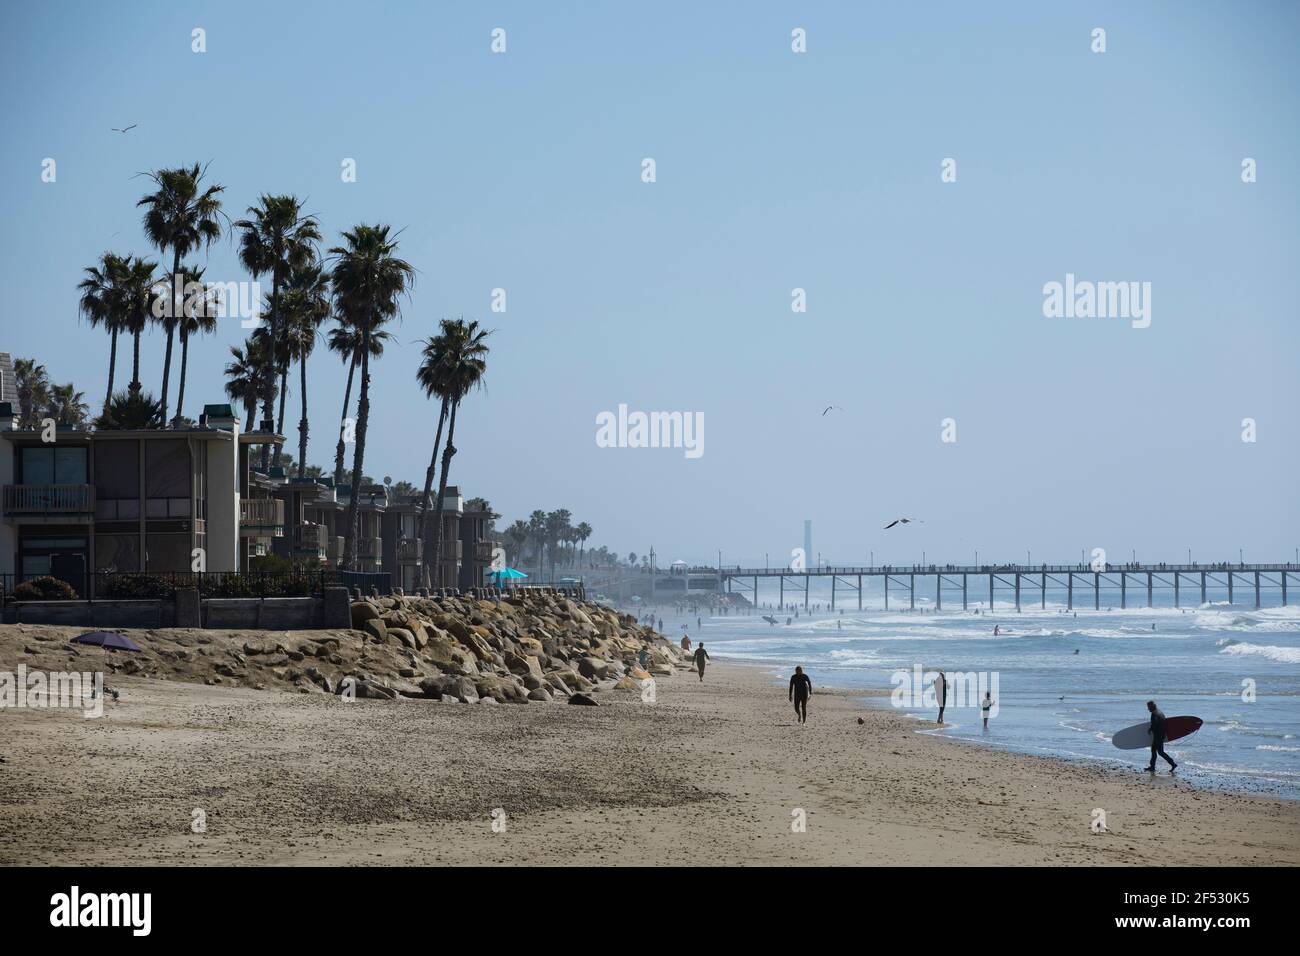 Afternoon view of palm trees and beach of downtown Oceanside, California, USA. Stock Photo